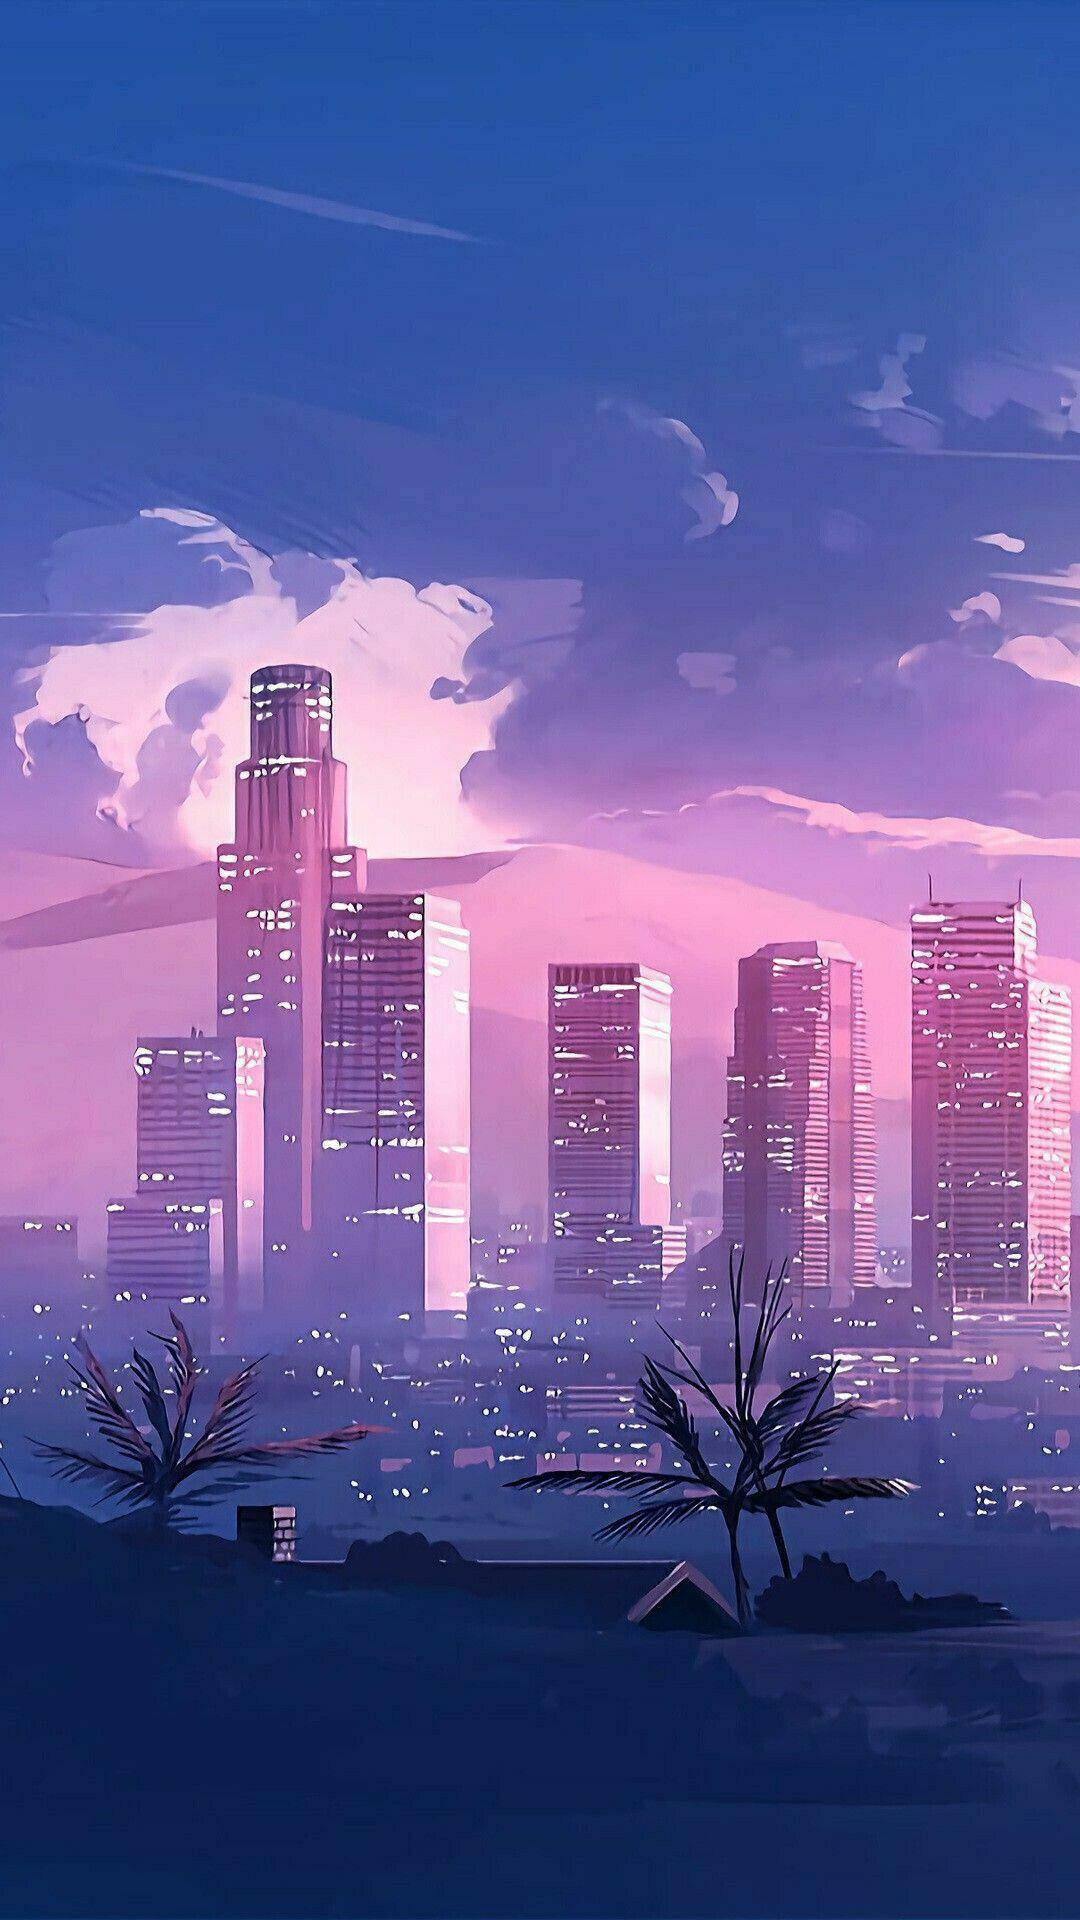 Aesthetic City With Towering Buildings